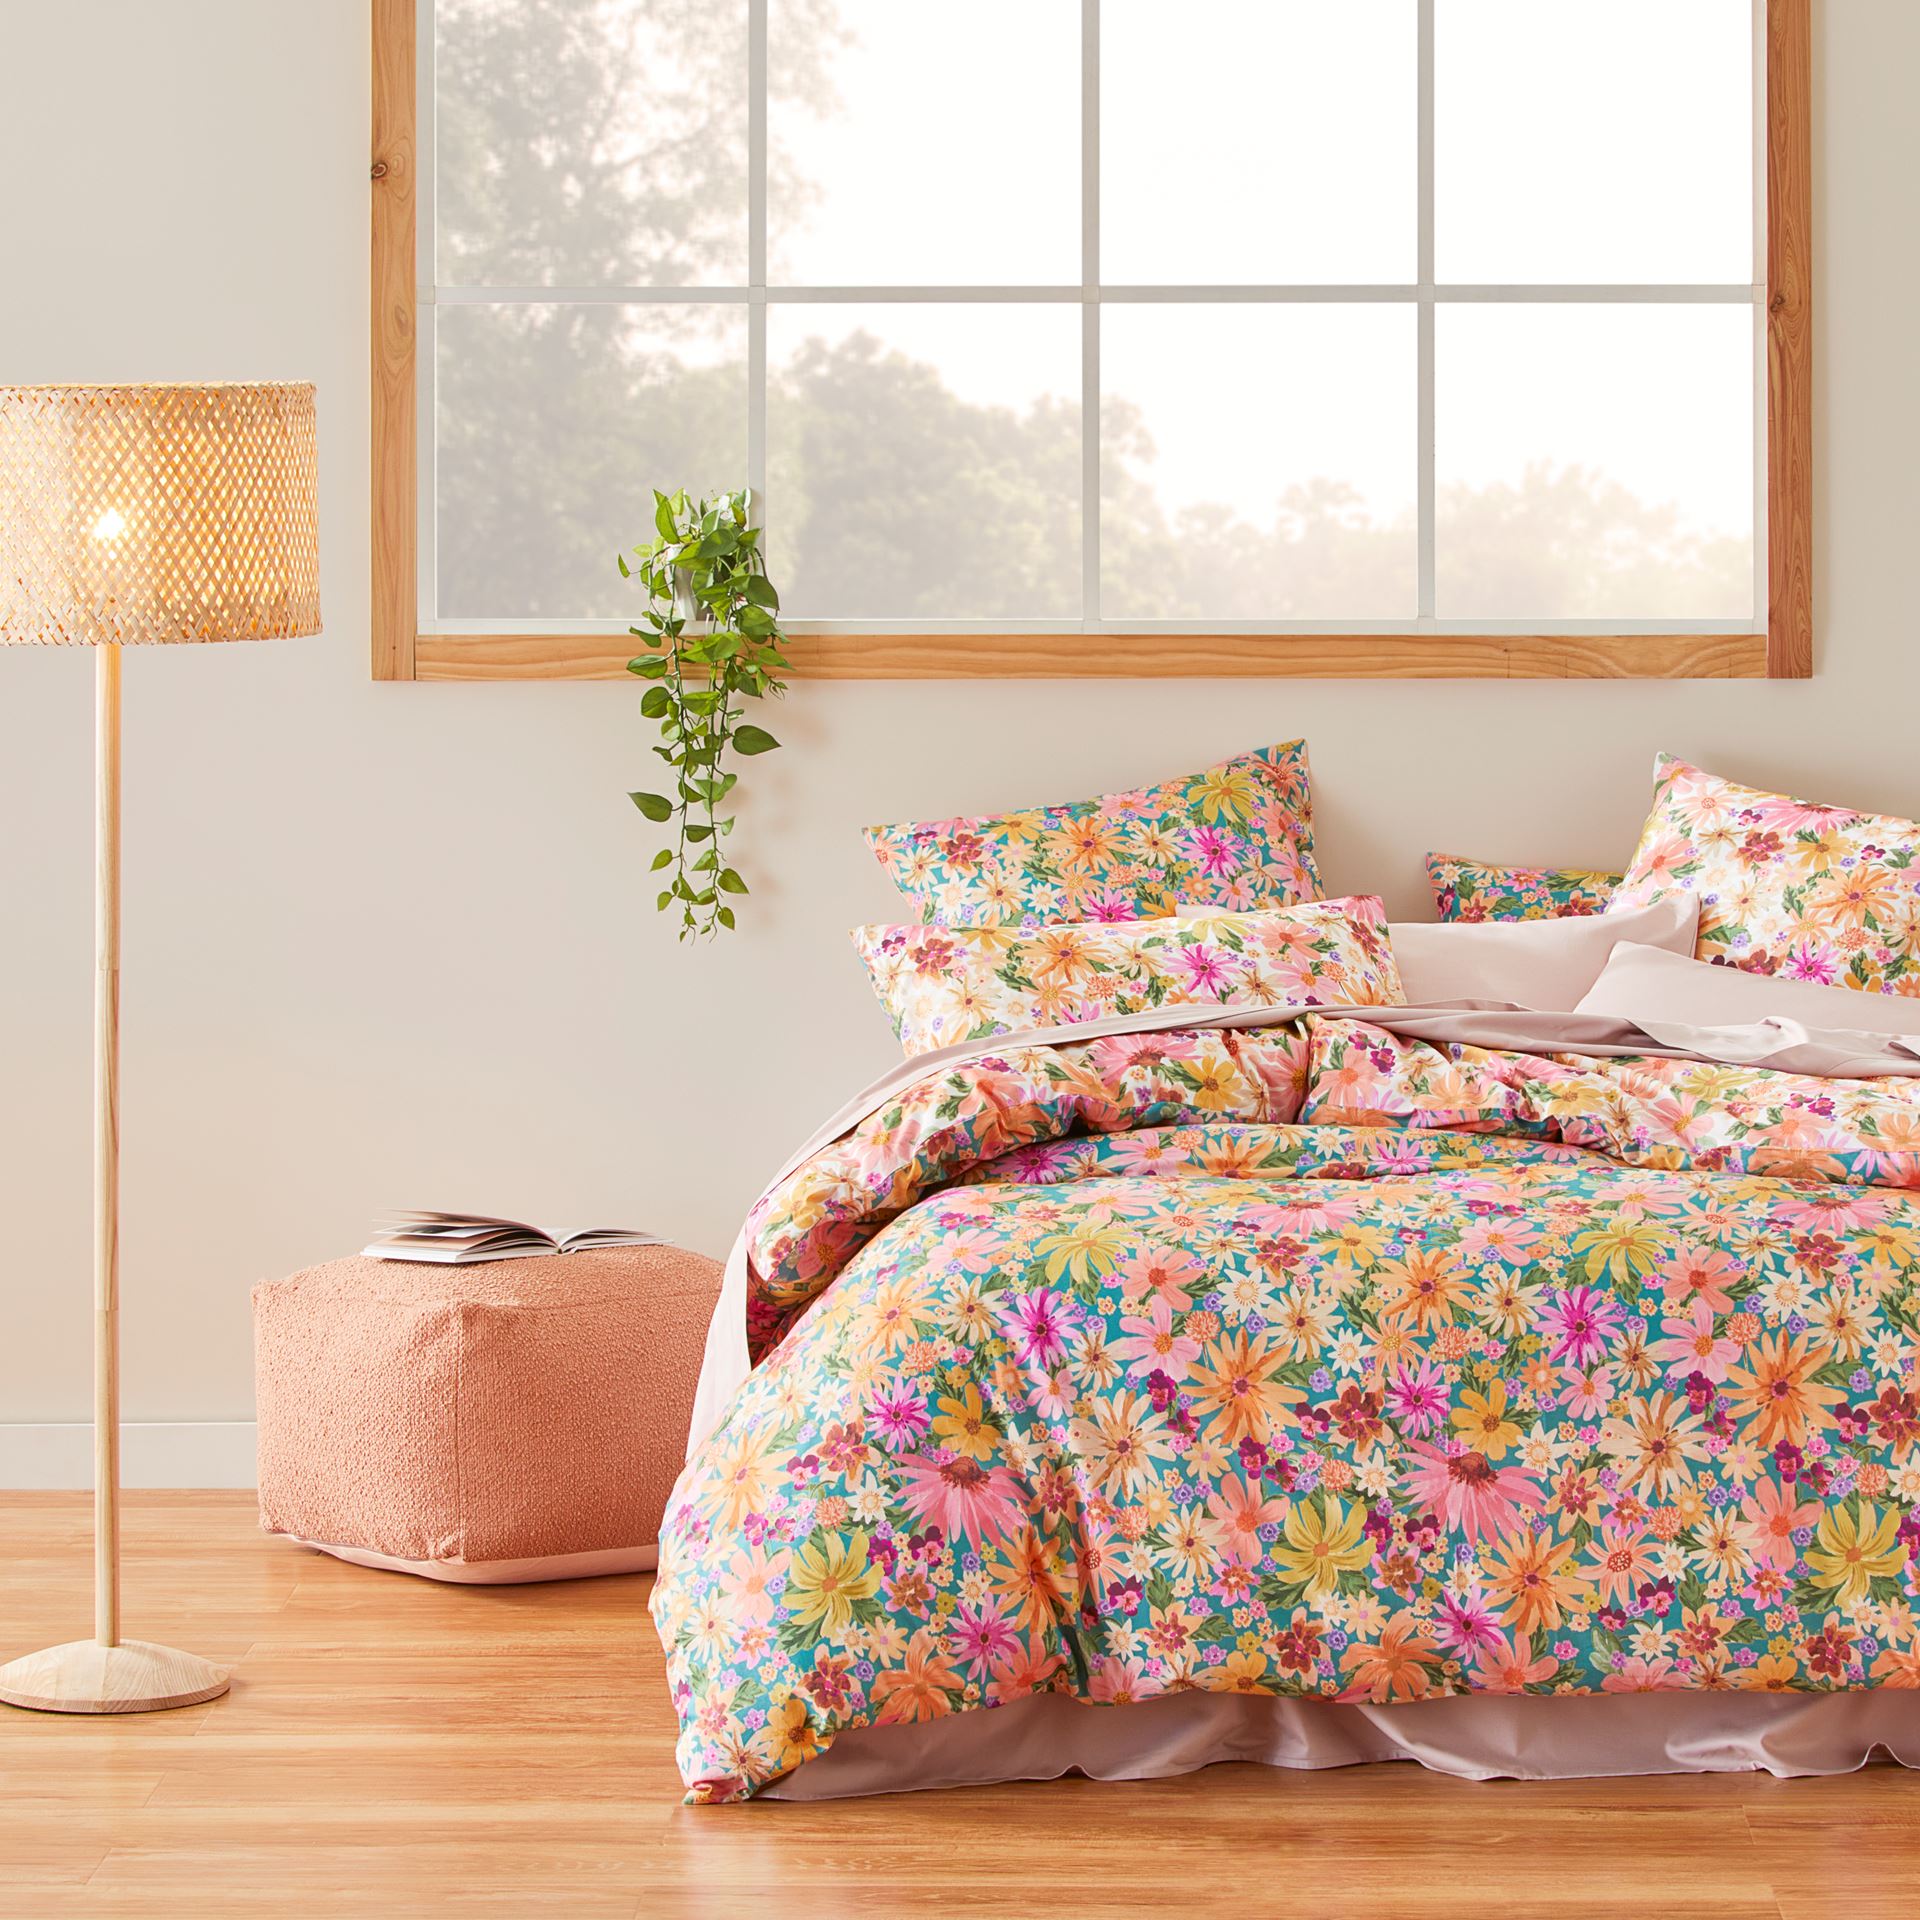 Alexa Floral Coral Quilt Cover, Bedroom